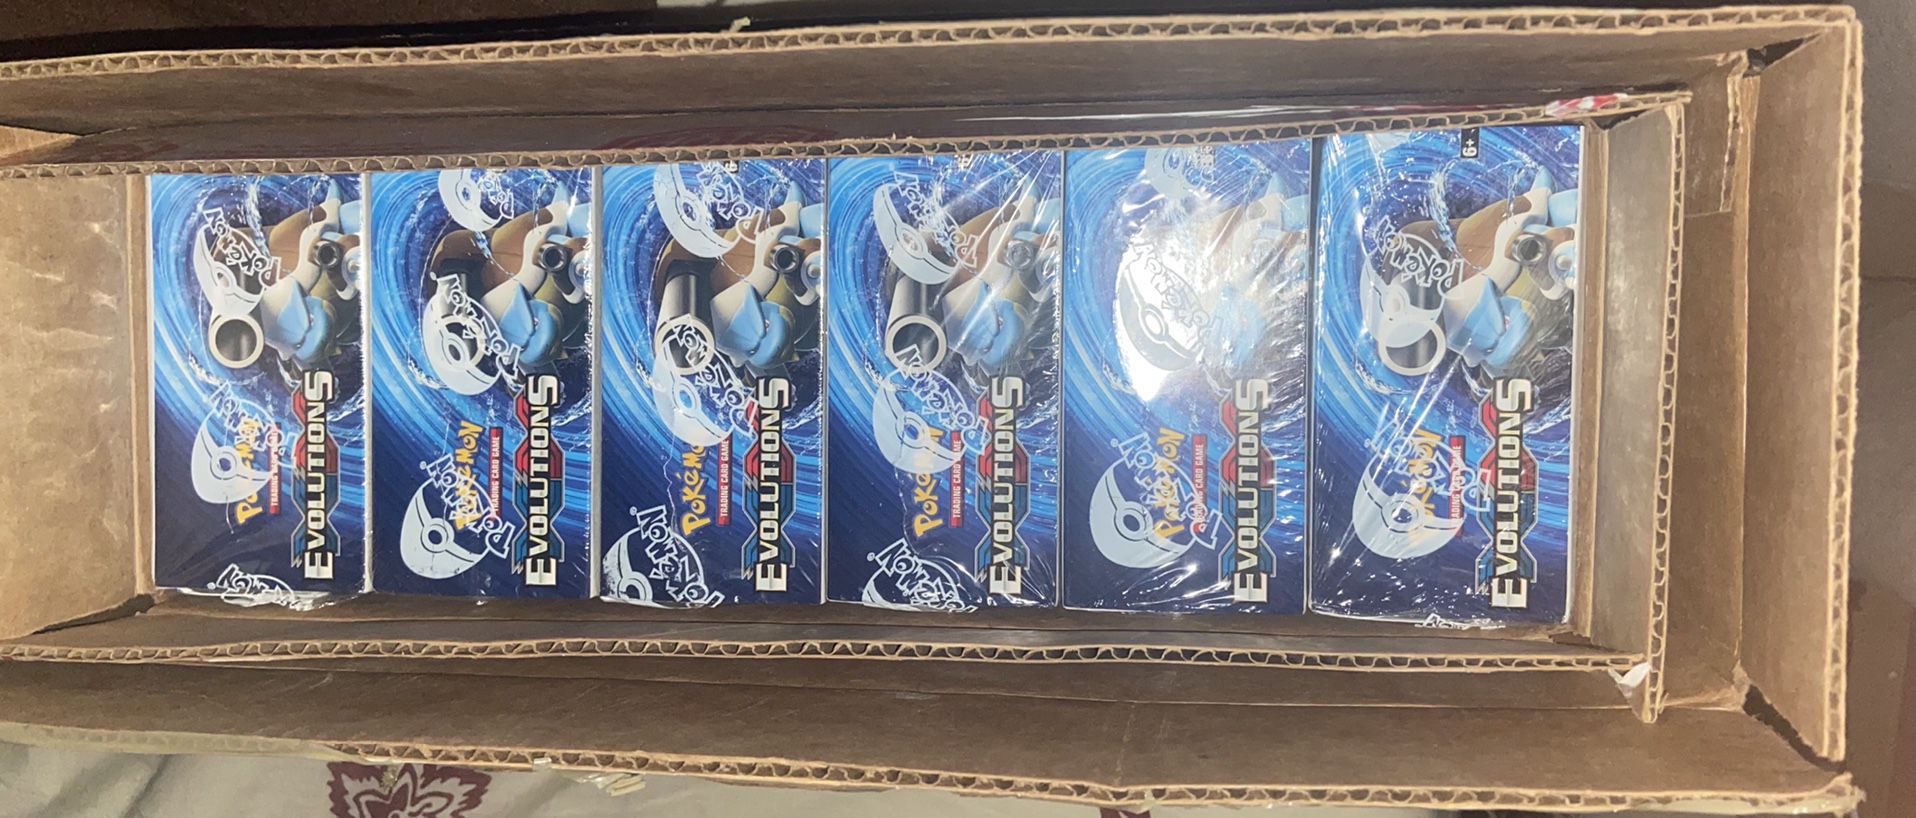 Pokemon XY Evolutions Booster Box (OPEN) Case Sealed (6 booster boxes)